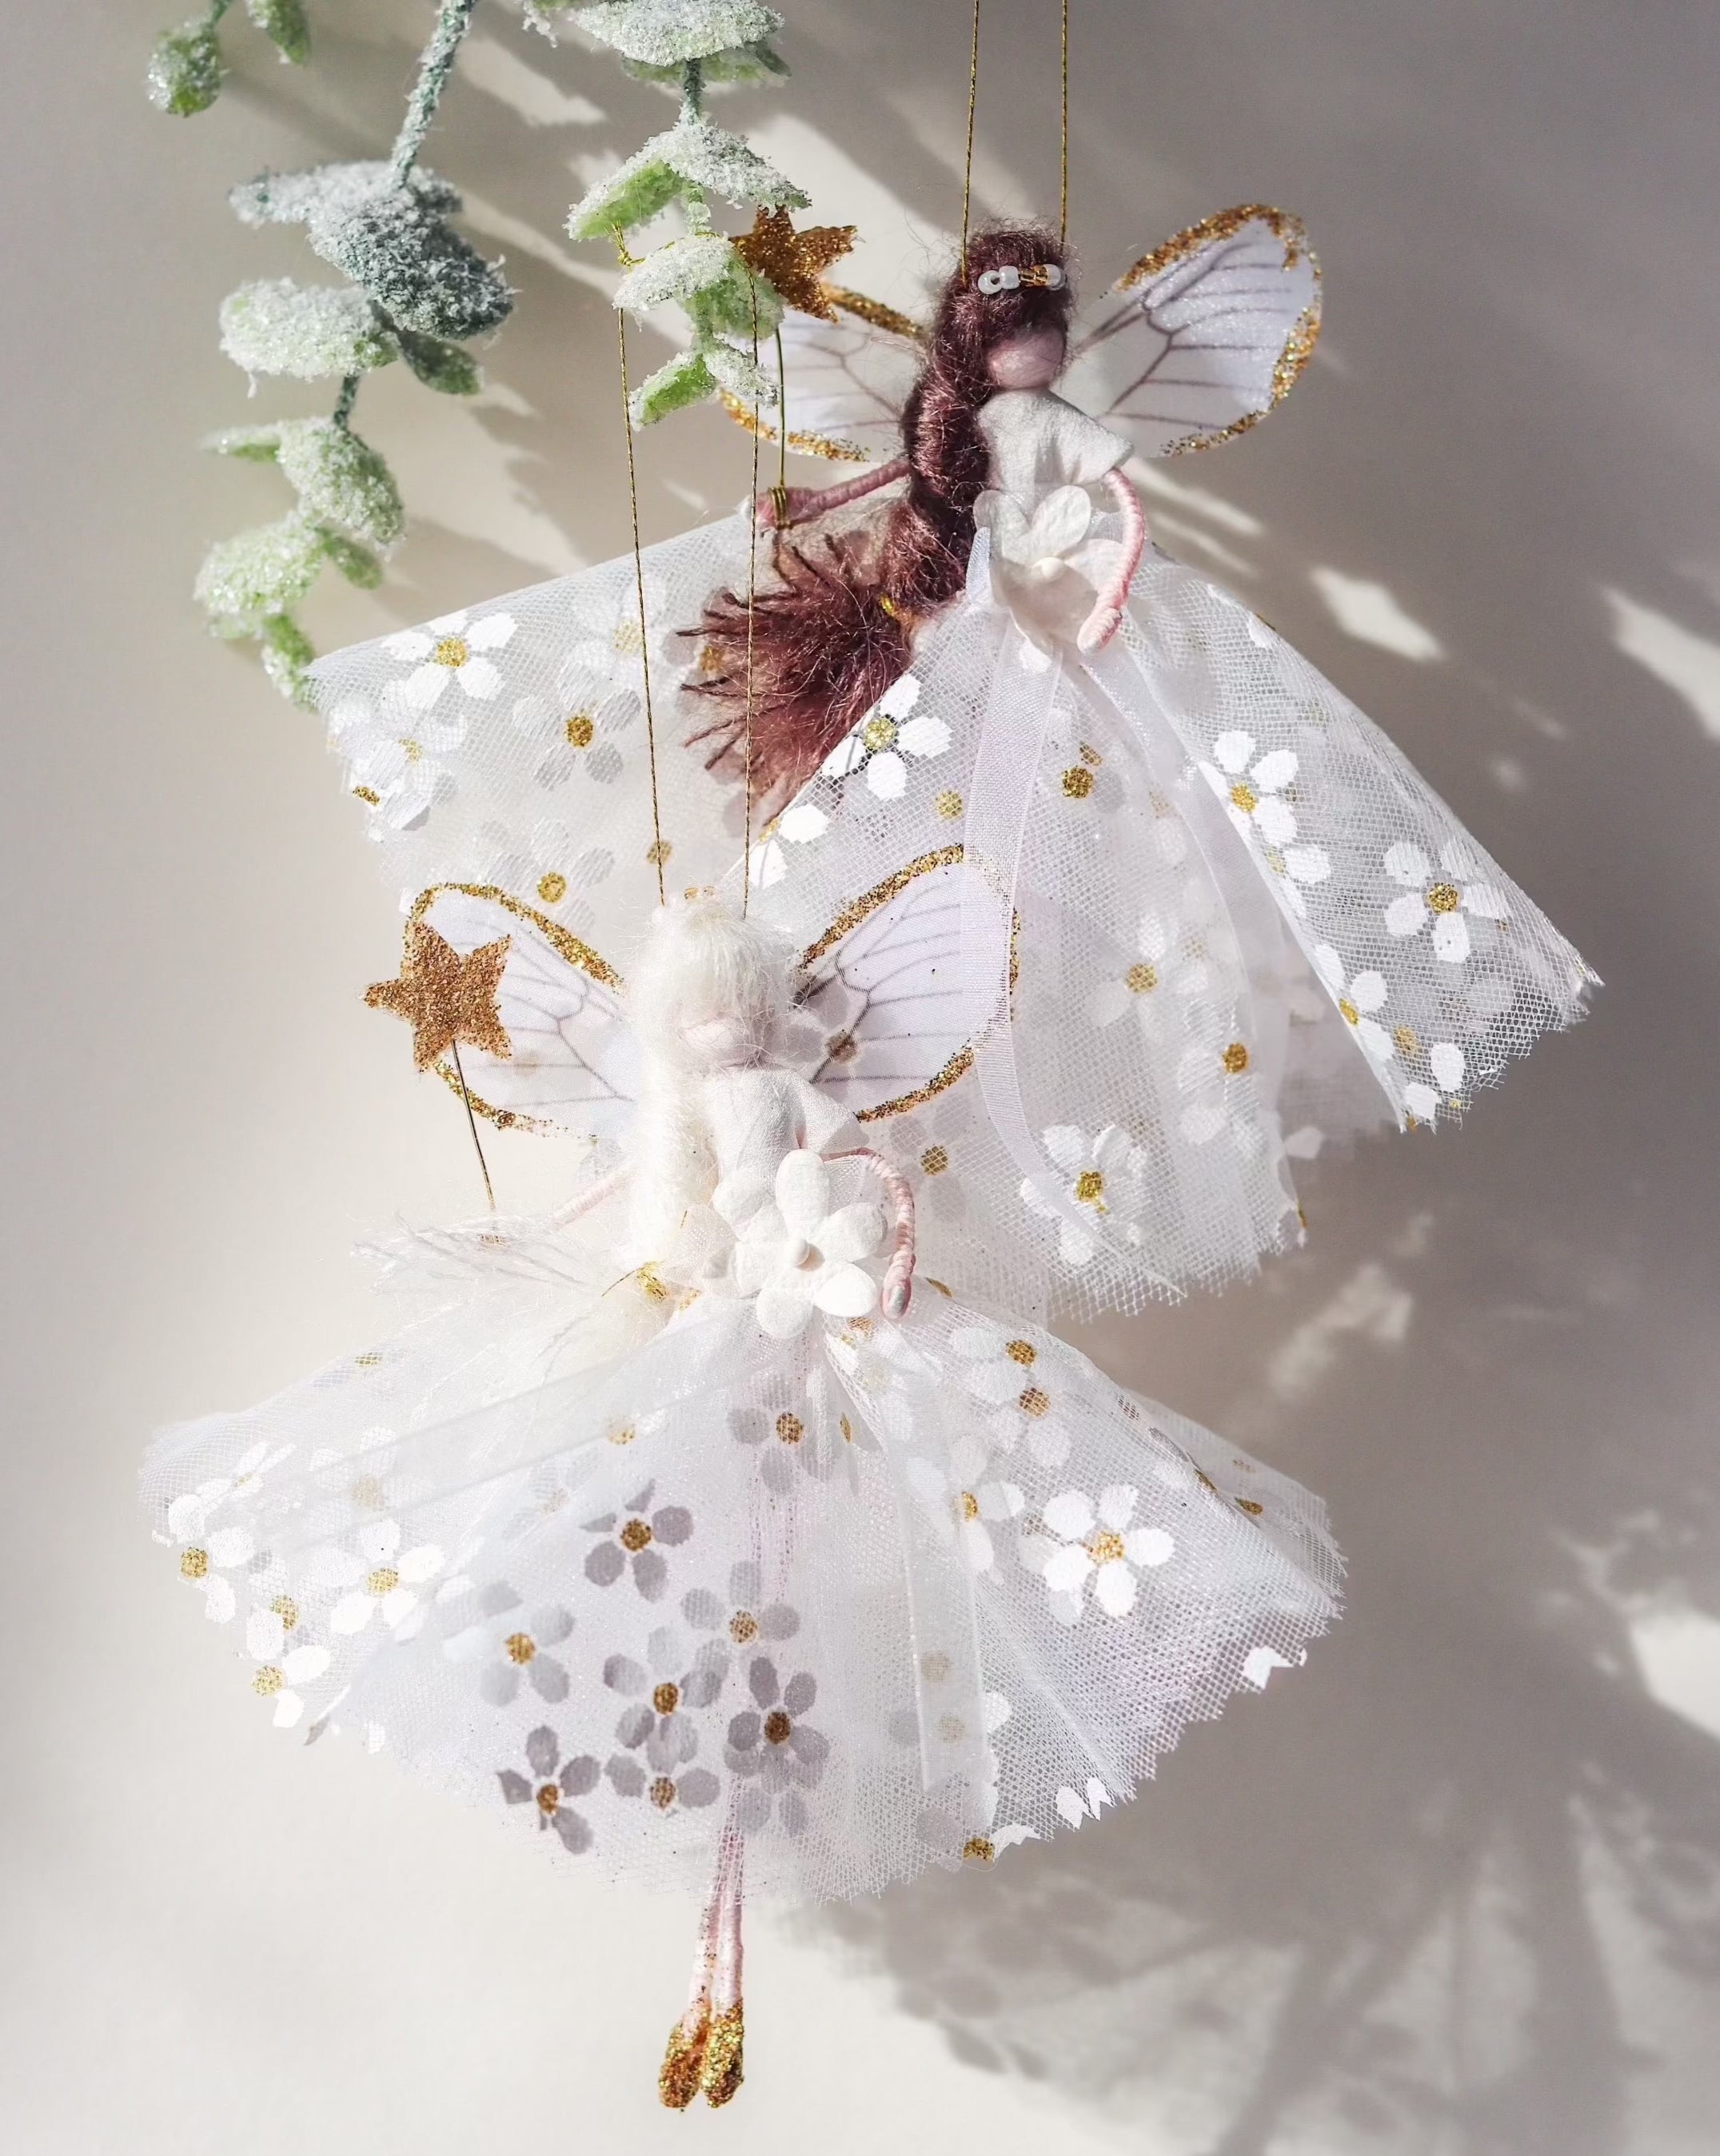 Two ‘Hope’ Fairy Decoration, Handmade fairy decoration that makes the perfect heirloom gift for Birthdays, Easter and Special Occasions. wearing a white and gold floral dress with a handmade gold glitter wand and delicate wings.